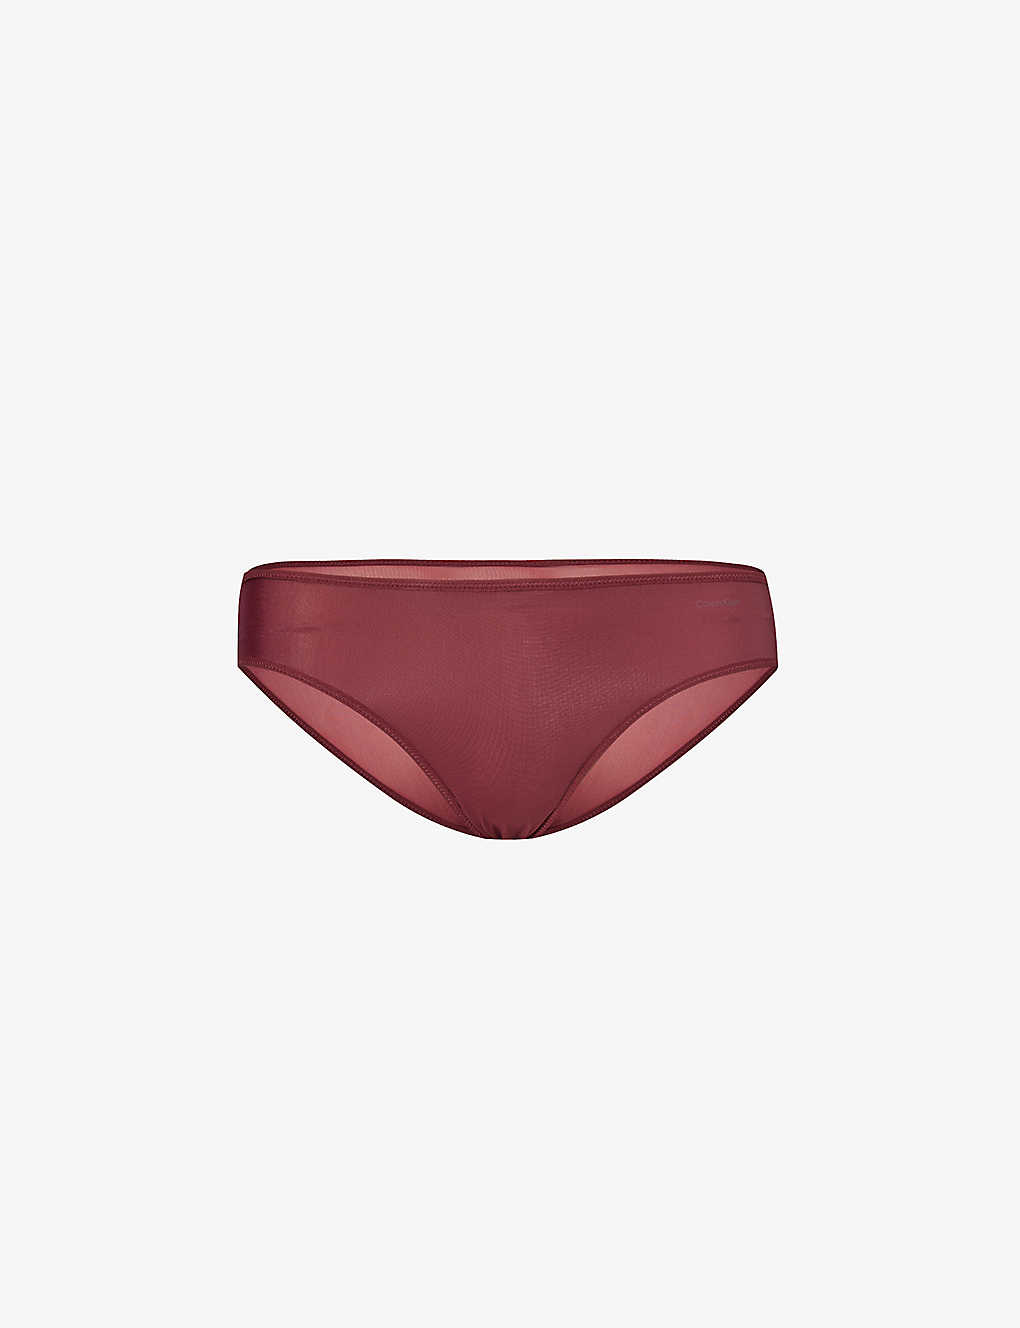 Calvin Klein Womens Tawny Port Marquisette Sheer Stretch-recycled Nylon Briefs